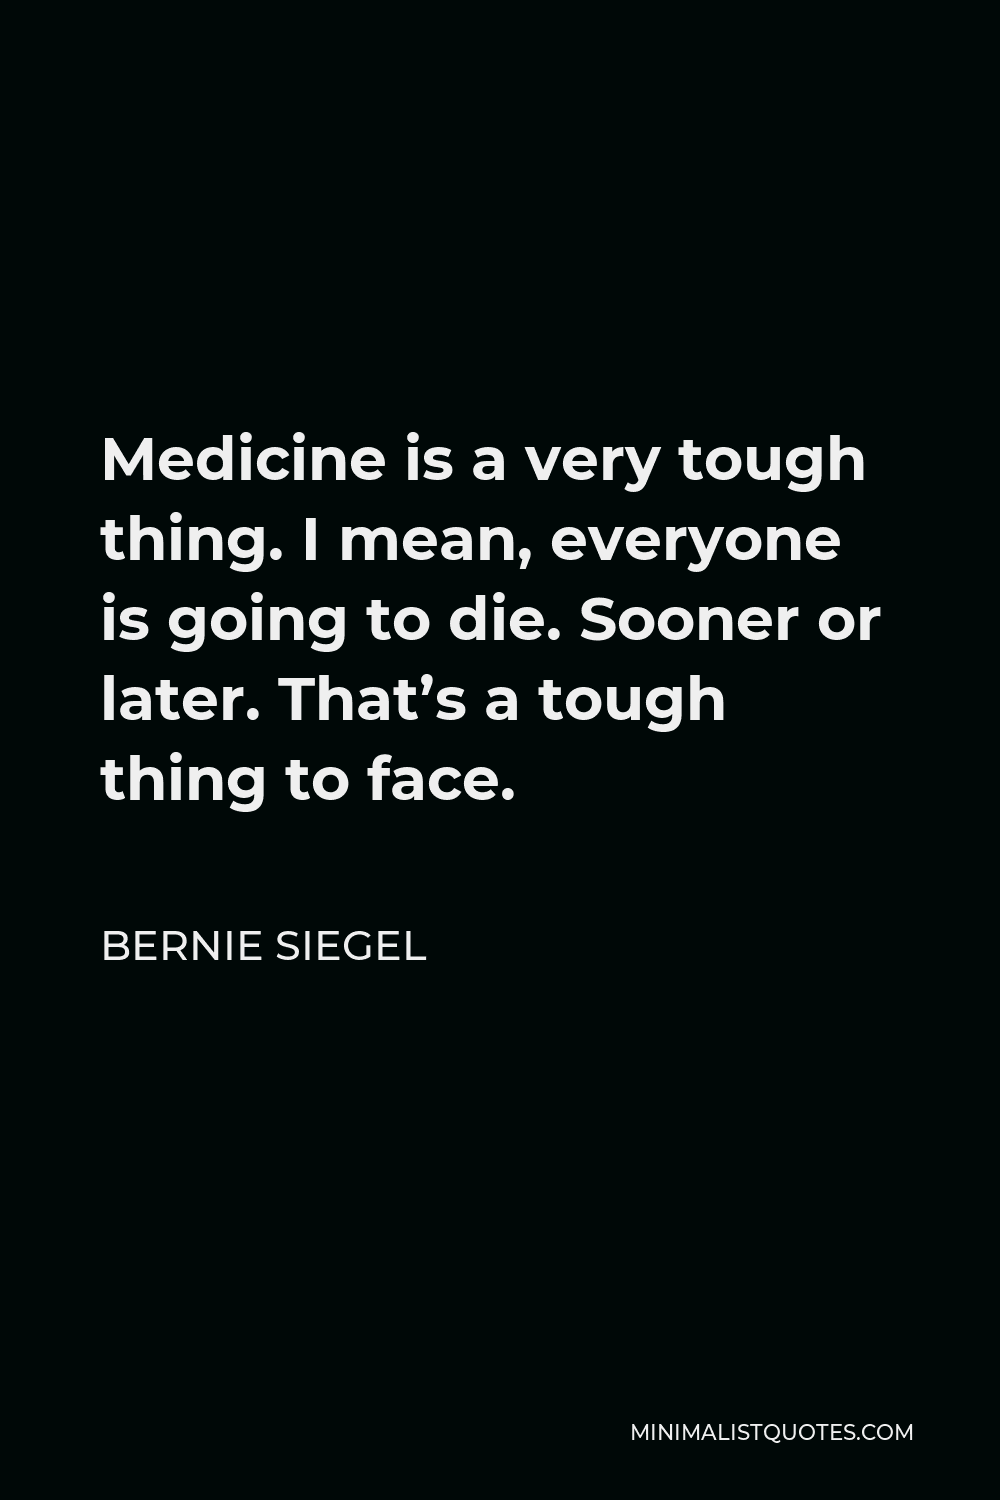 Bernie Siegel Quote - Medicine is a very tough thing. I mean, everyone is going to die. Sooner or later. That’s a tough thing to face.